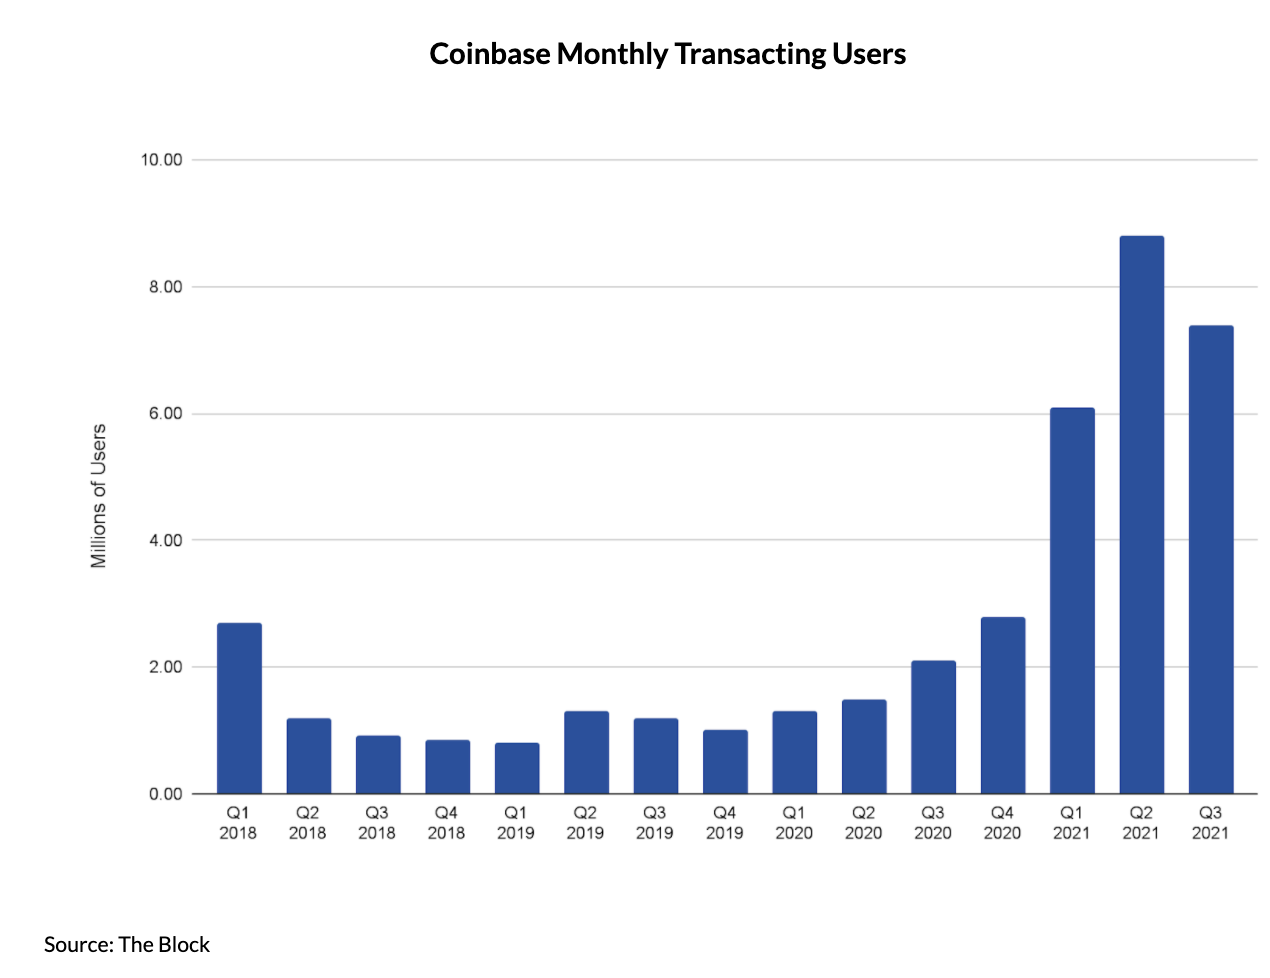 Coinbase monthly transacting users